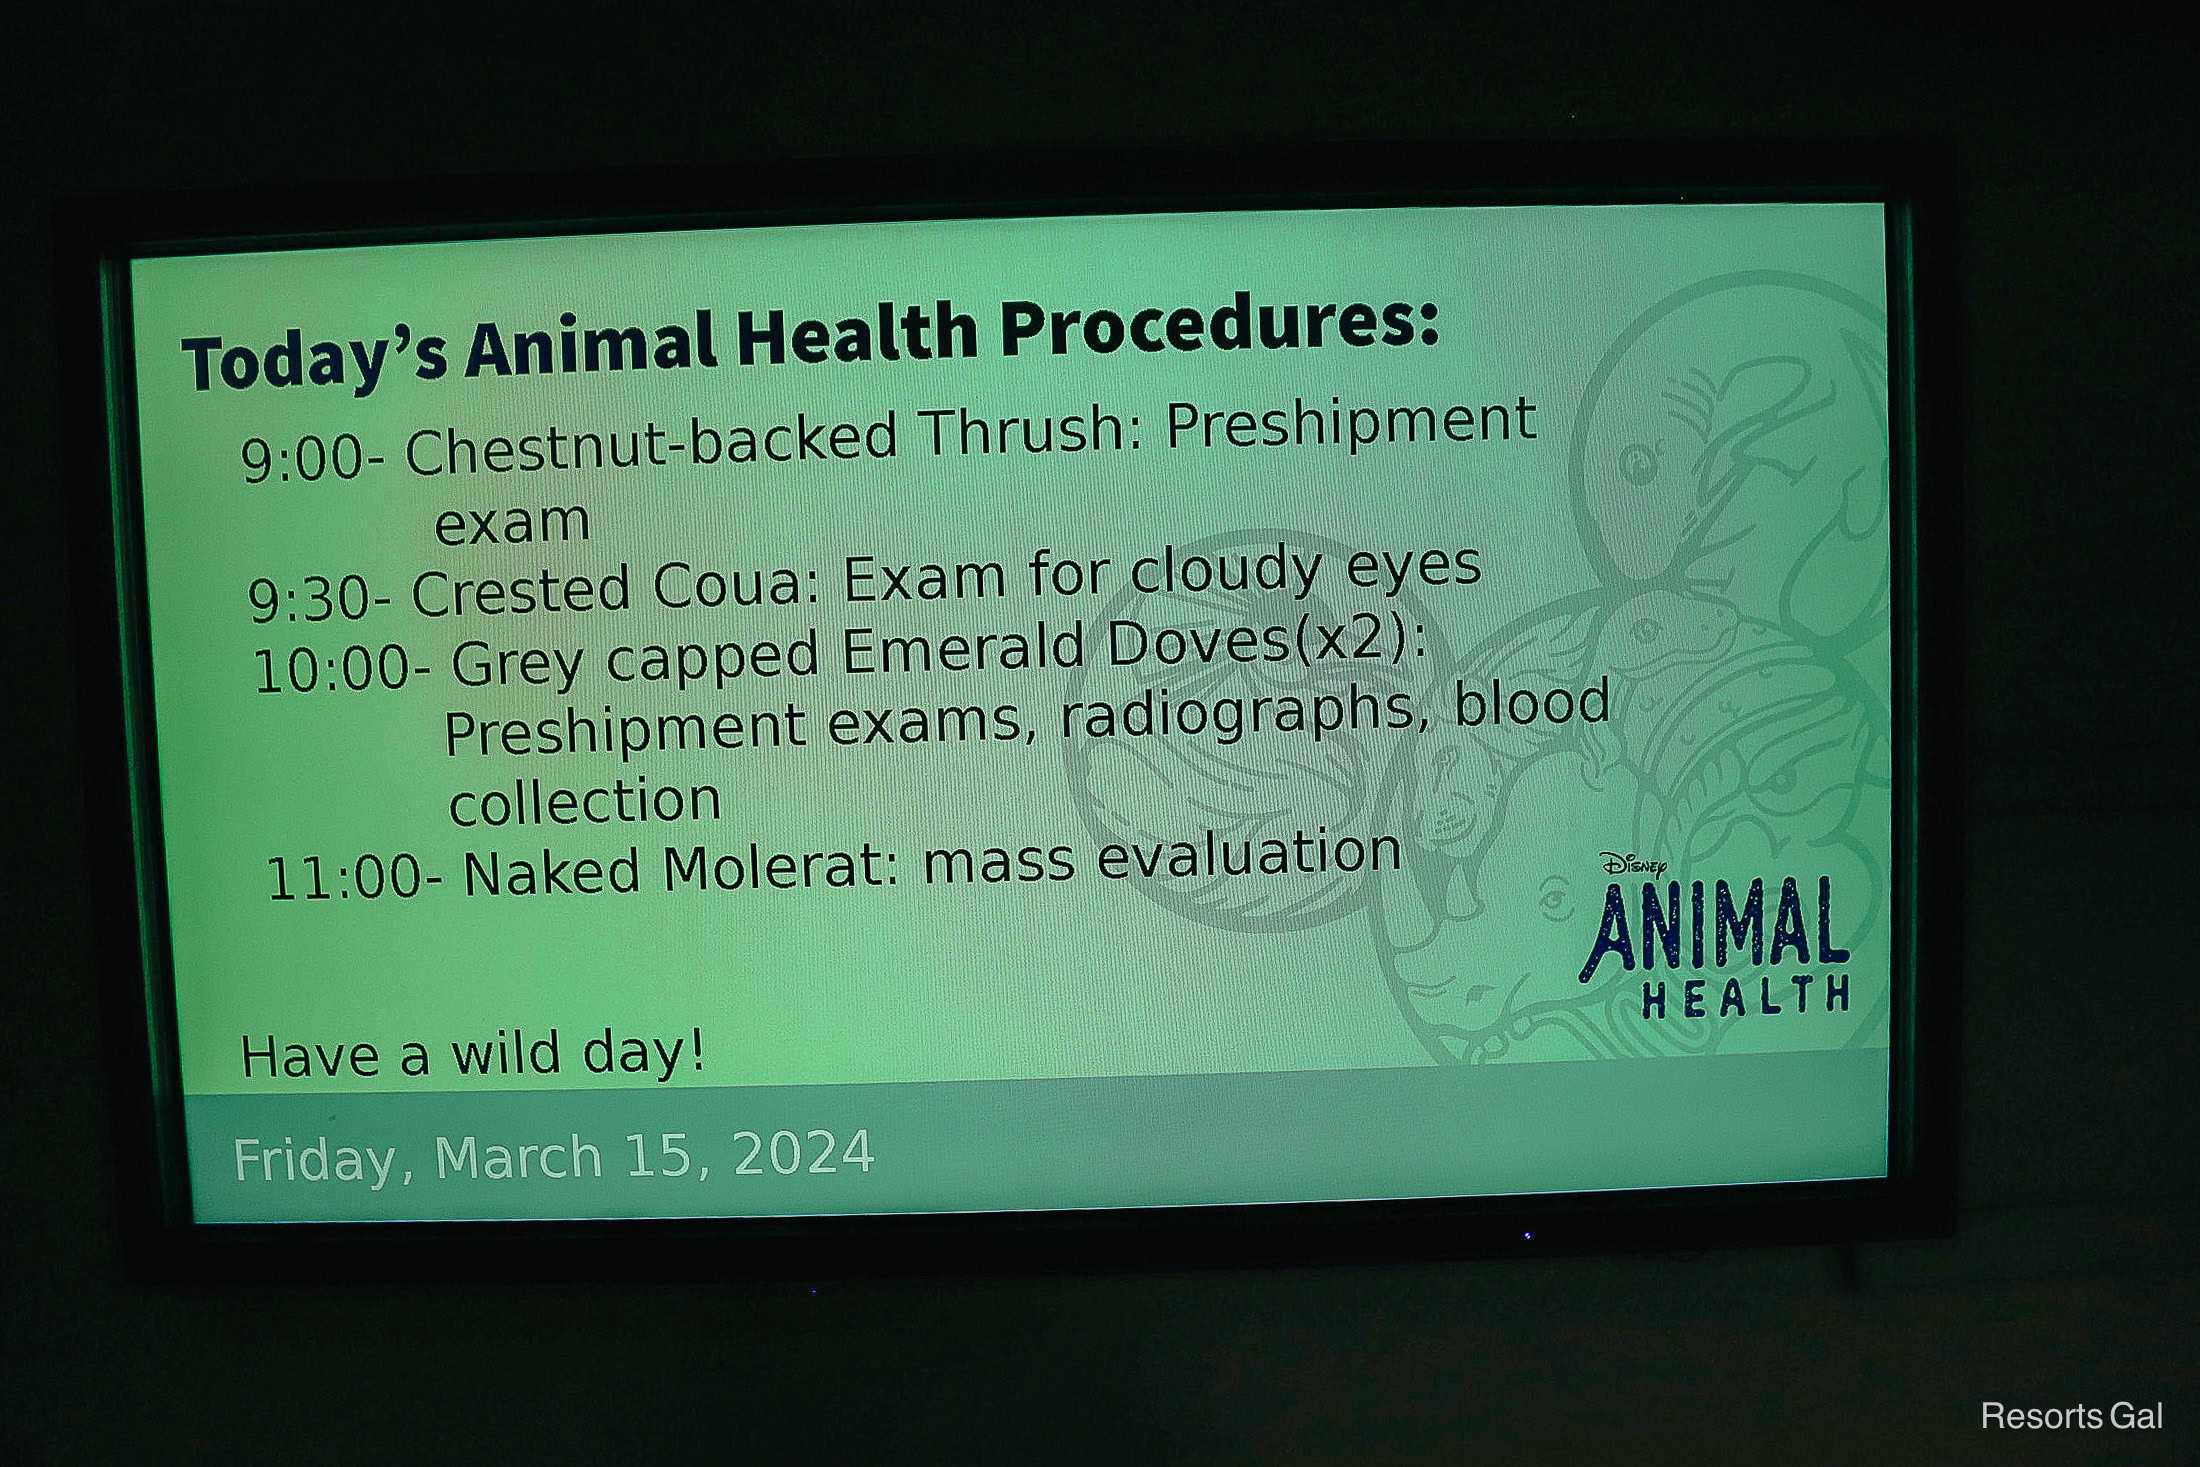 a list of animal procedures scheduled for the day at Conservation Station 